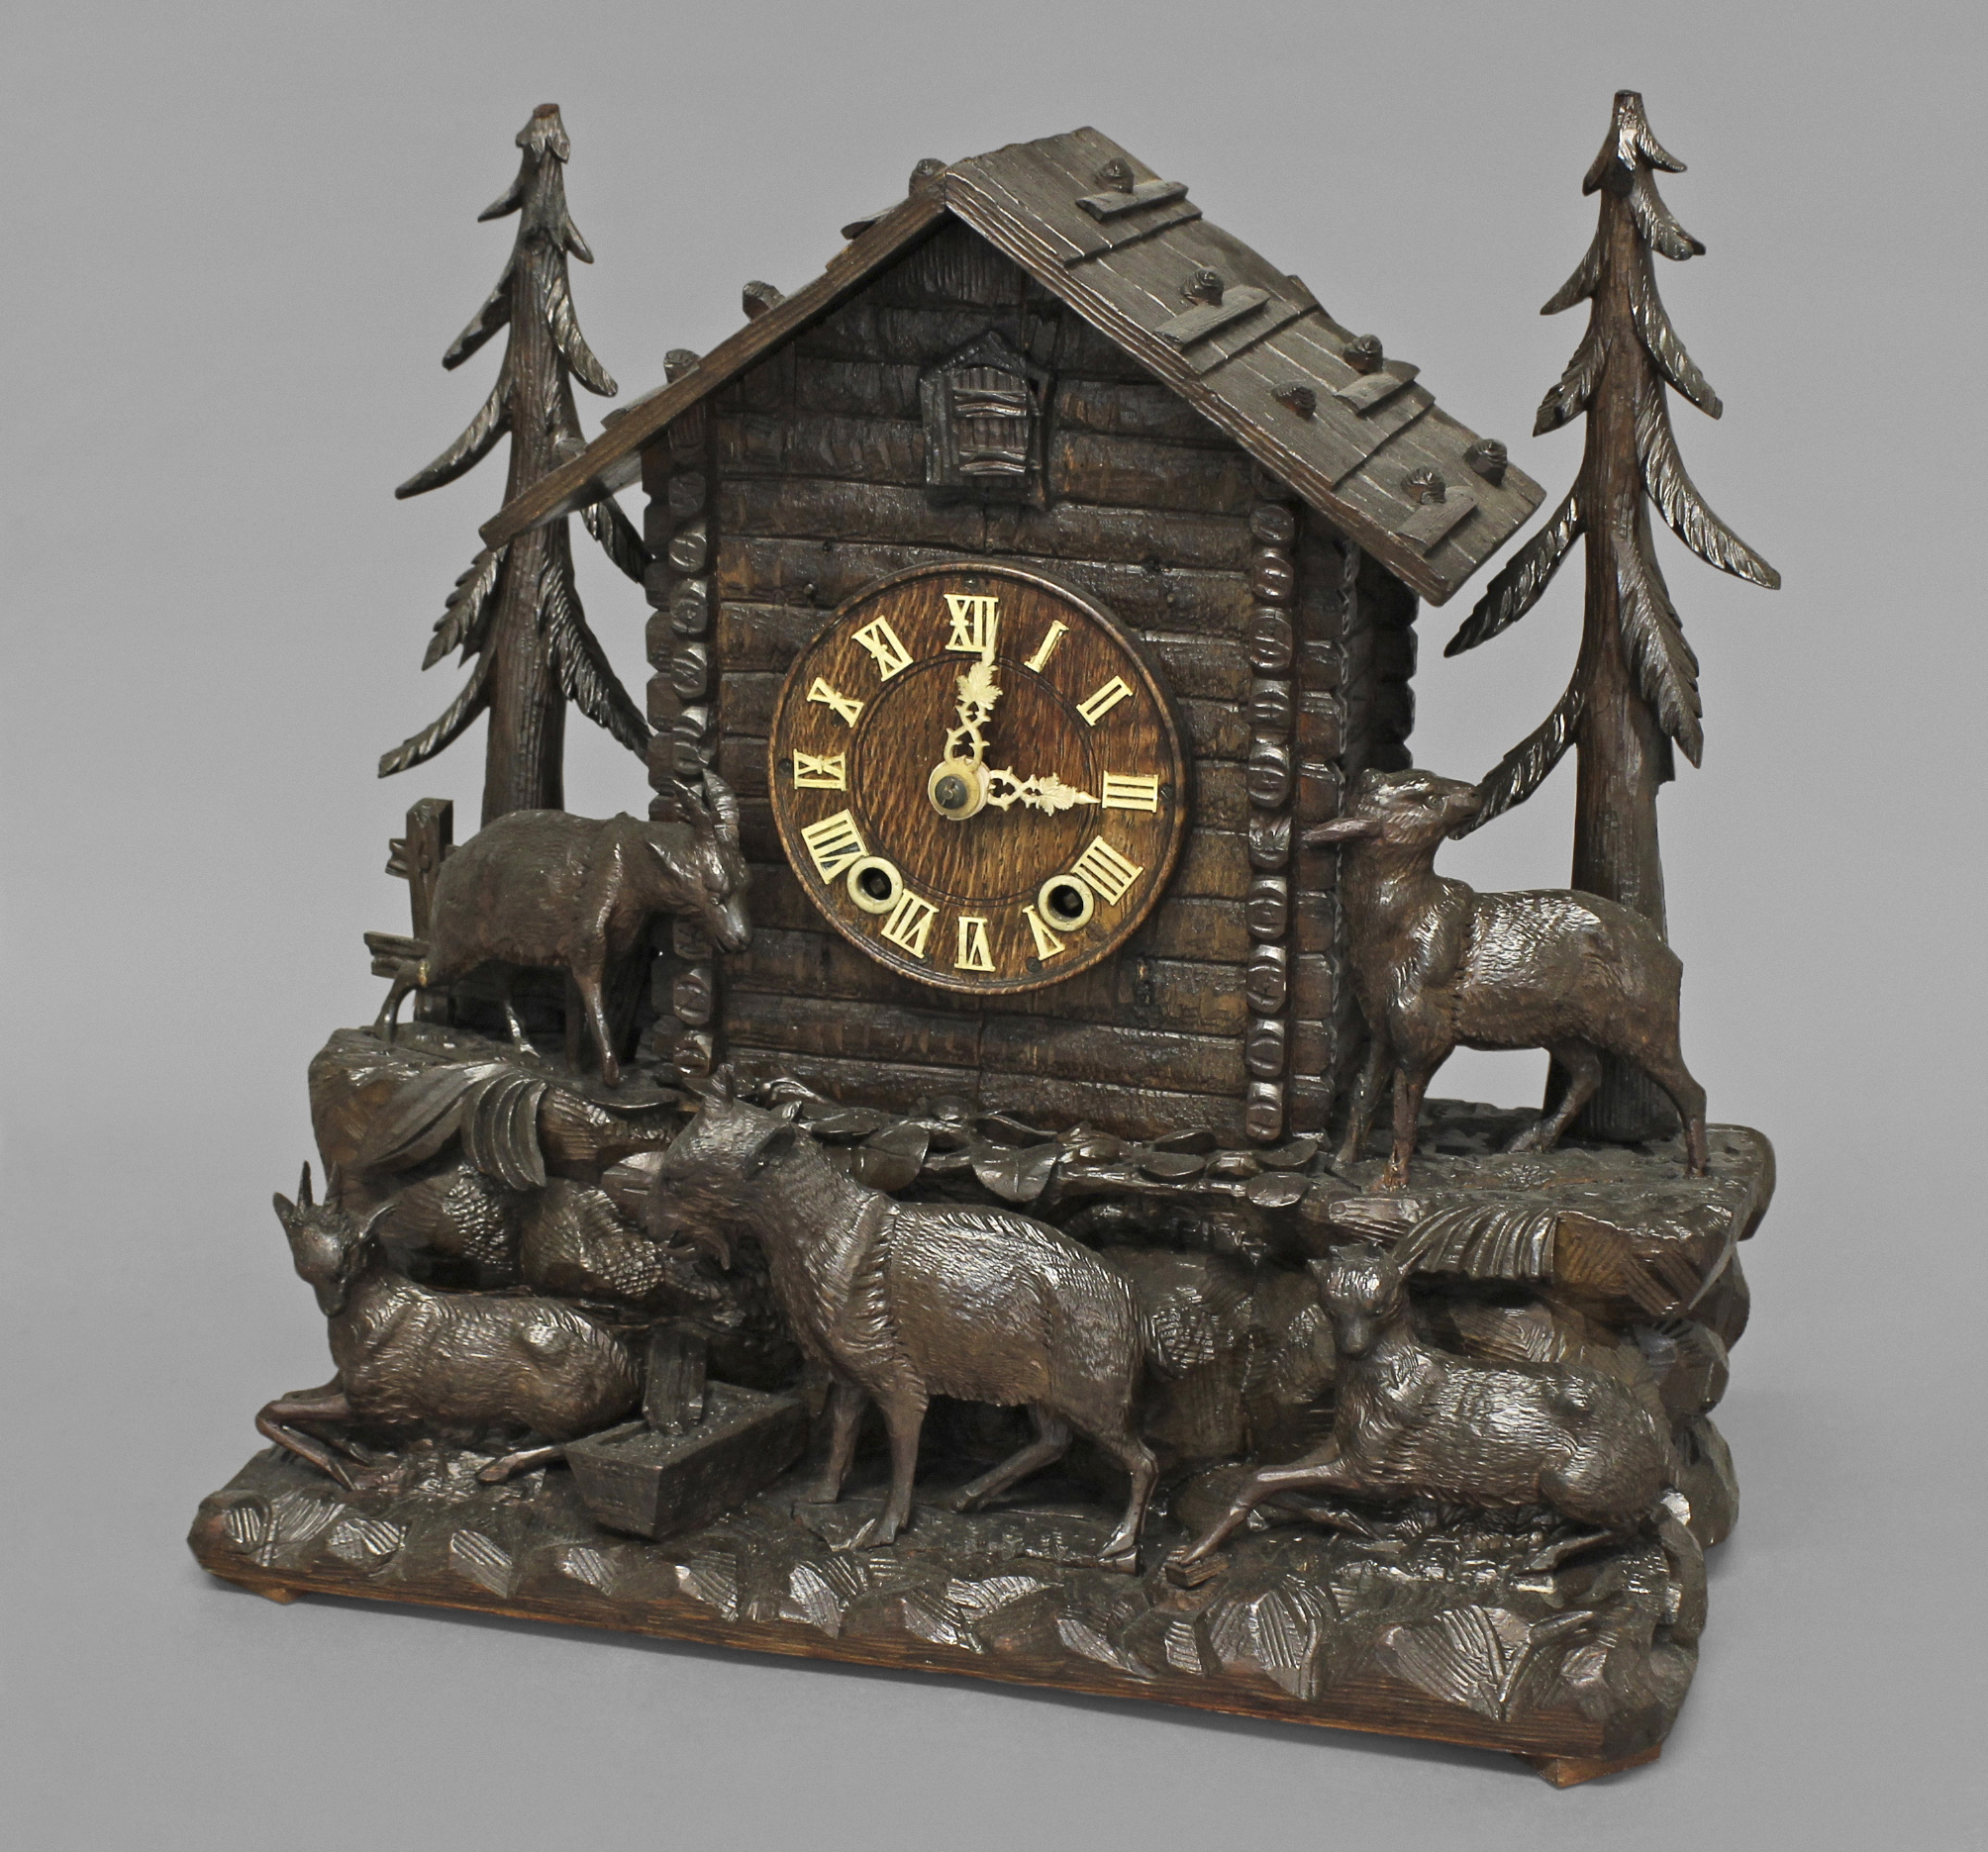 A BLACK FOREST CUCKOO CLOCK, the 5" wooden dial with Roman numerals on a brass eight day two train